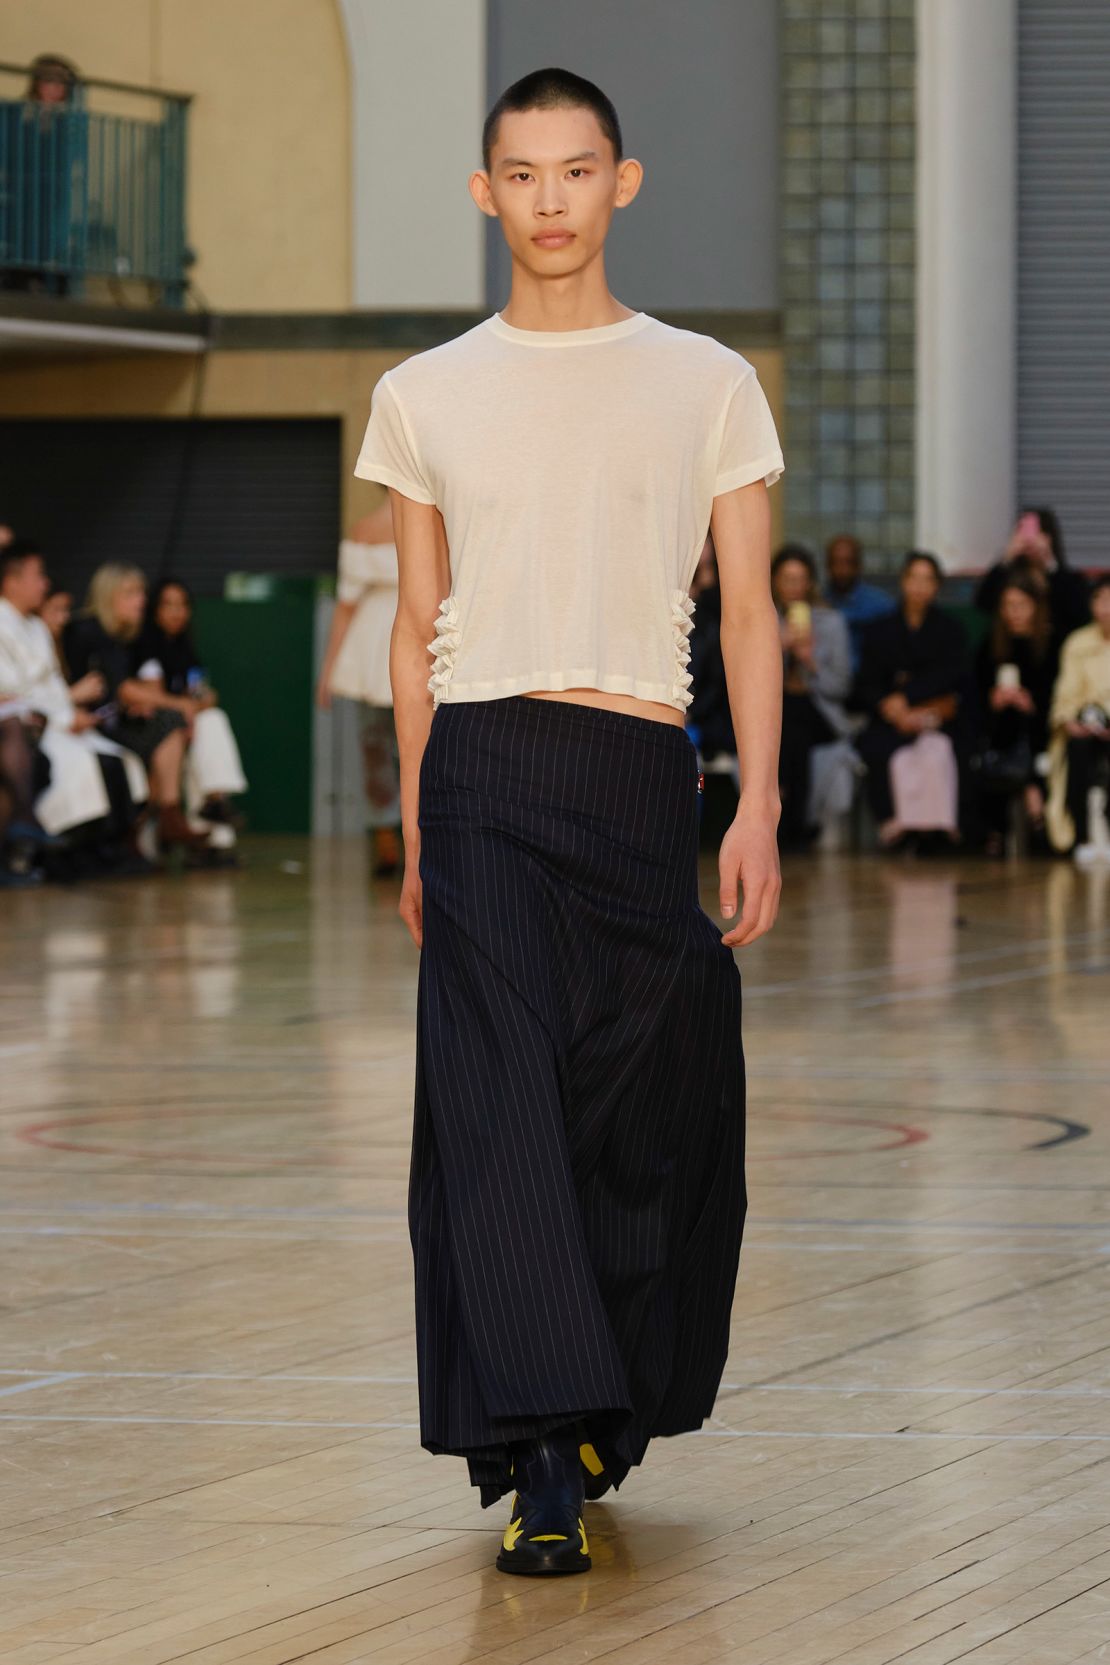 Men's skirts also featured on Goddard's runway.